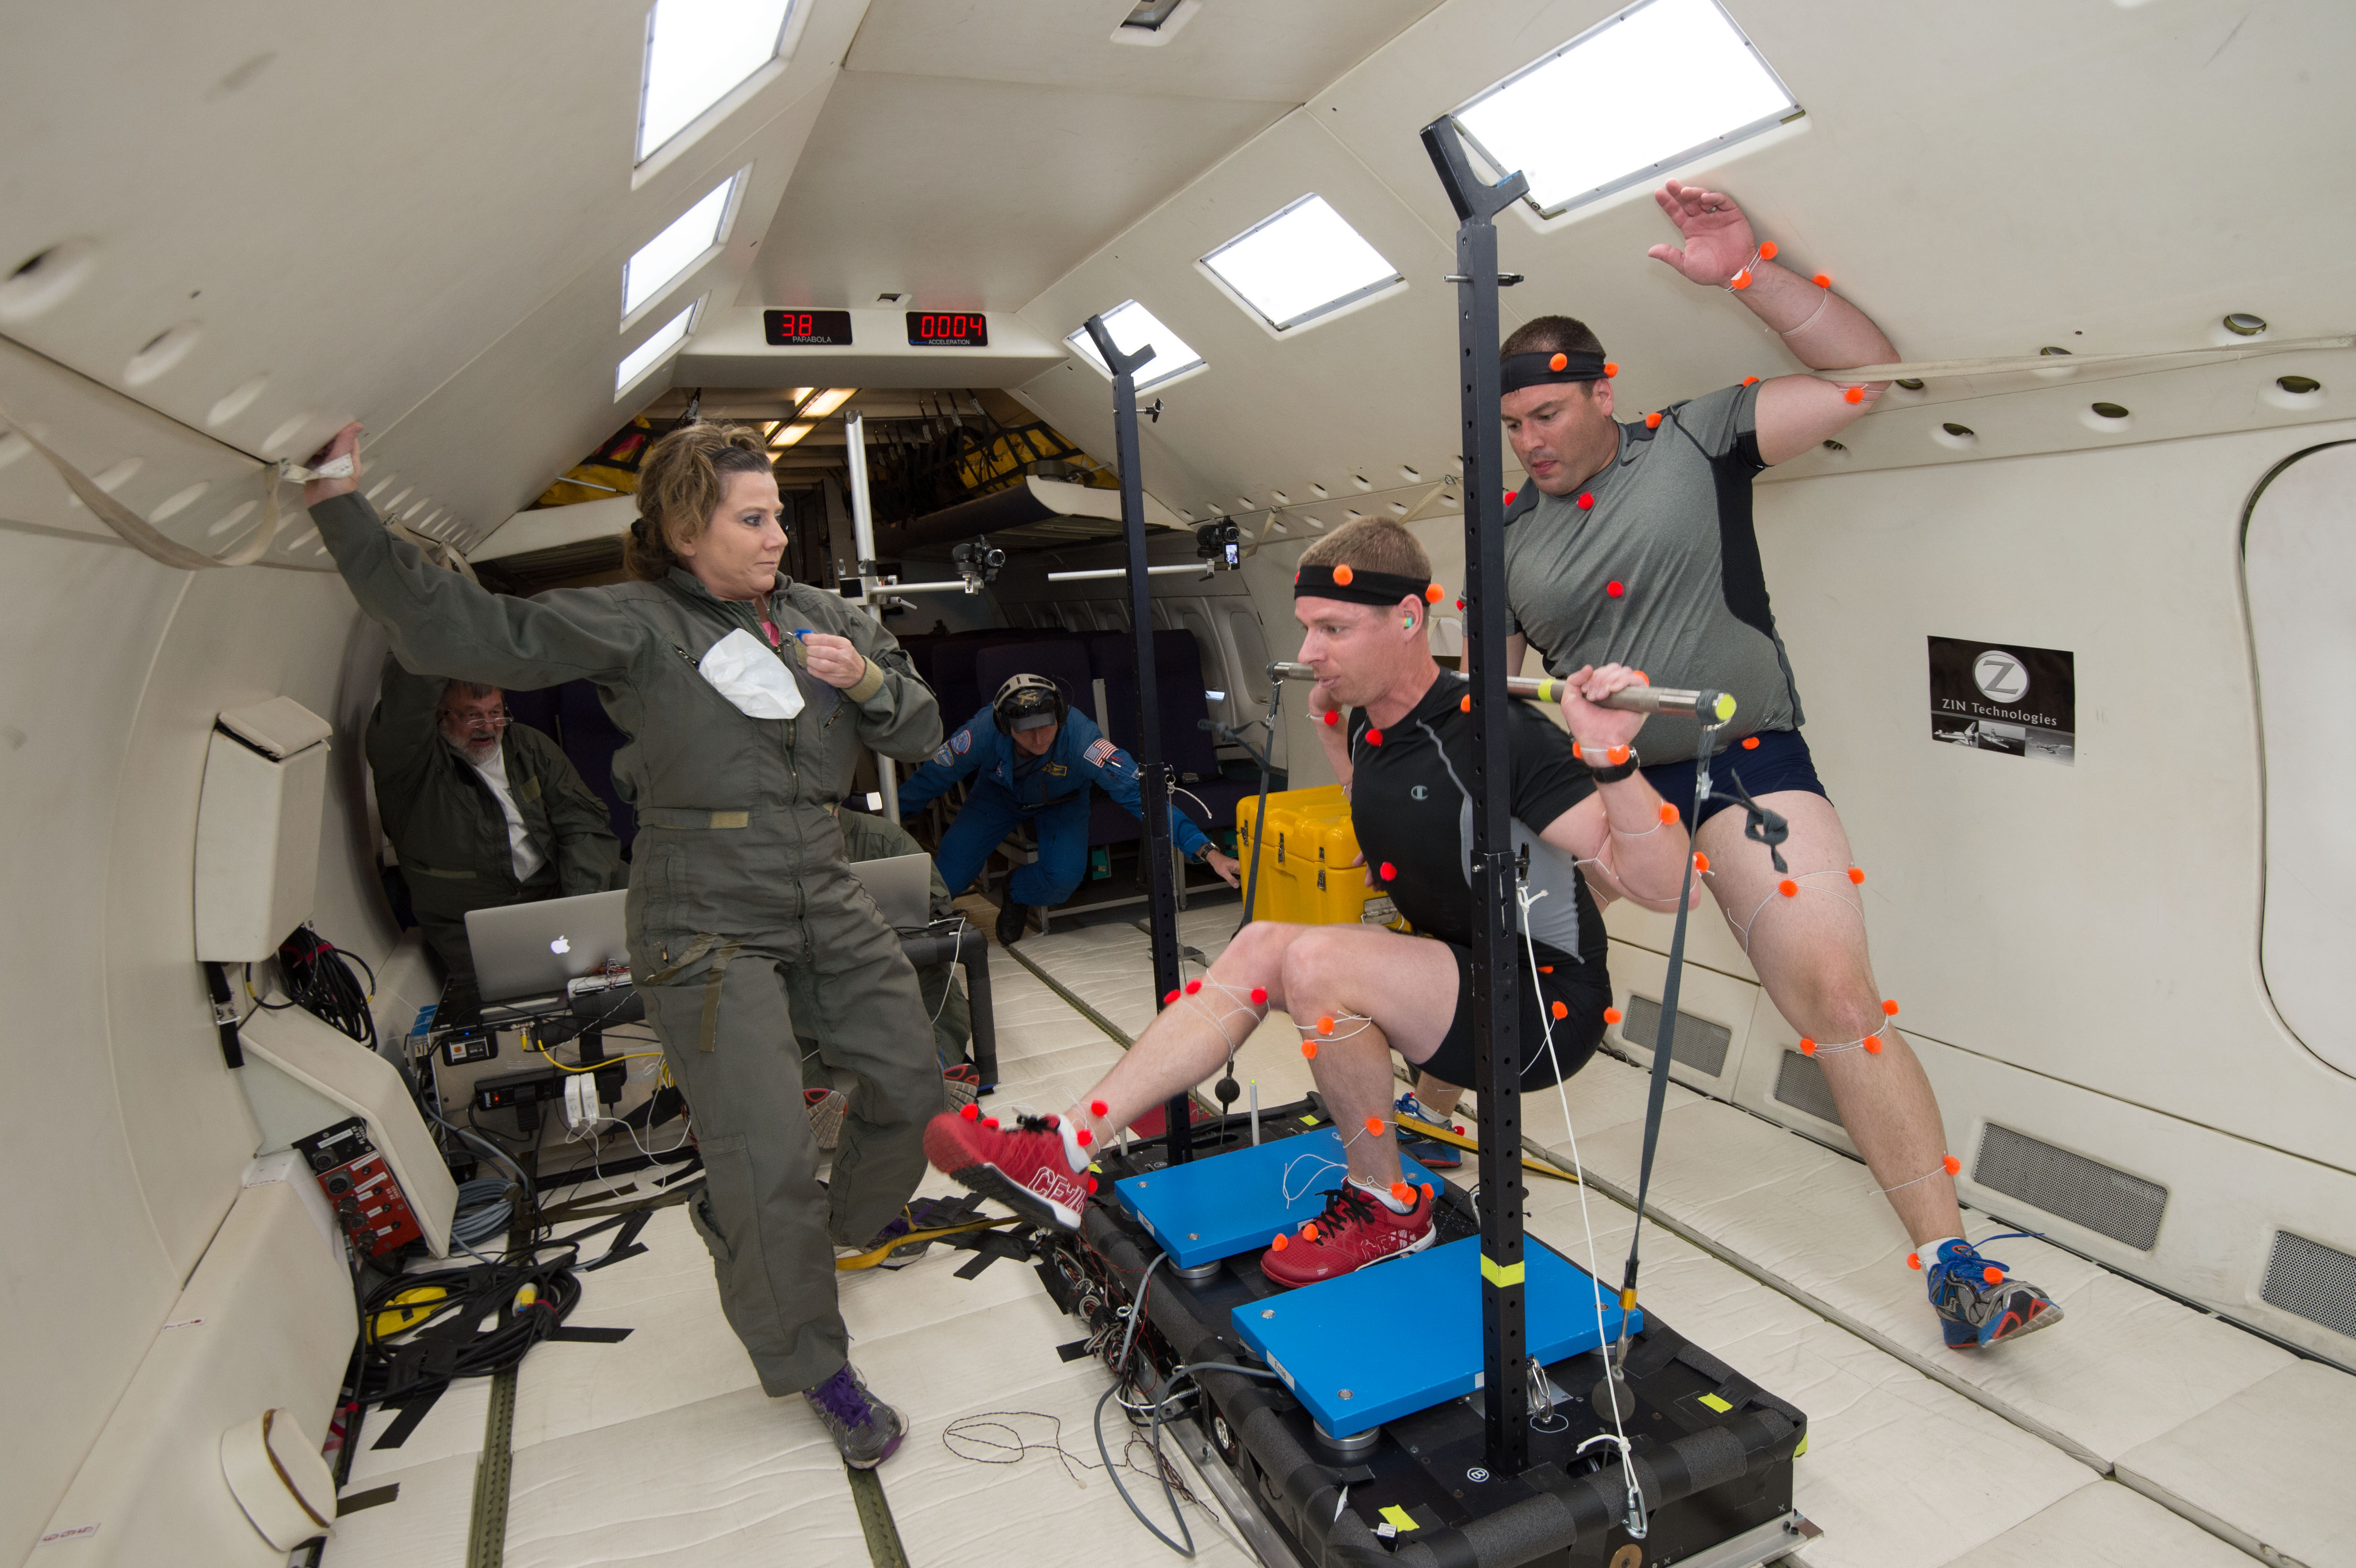 Improving The Efficacy of Resistive Exercise Microgravity Countermeasures For Musculoskeletal Health and Function Using Biomechanical Simulation (First Award Fellowship)